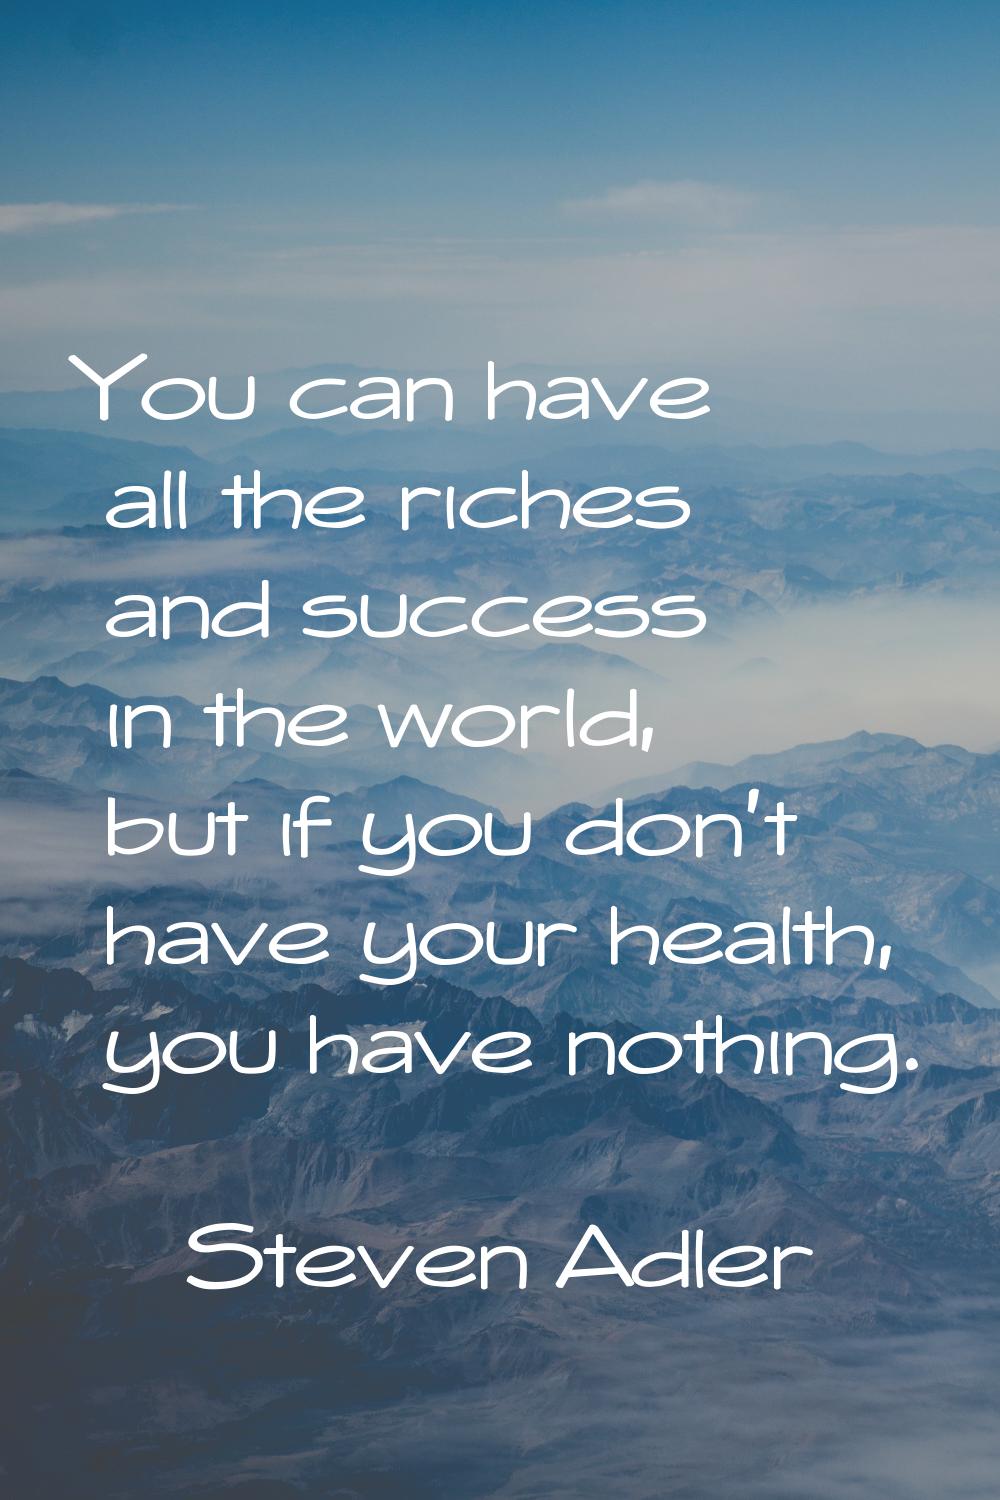 You can have all the riches and success in the world, but if you don't have your health, you have n